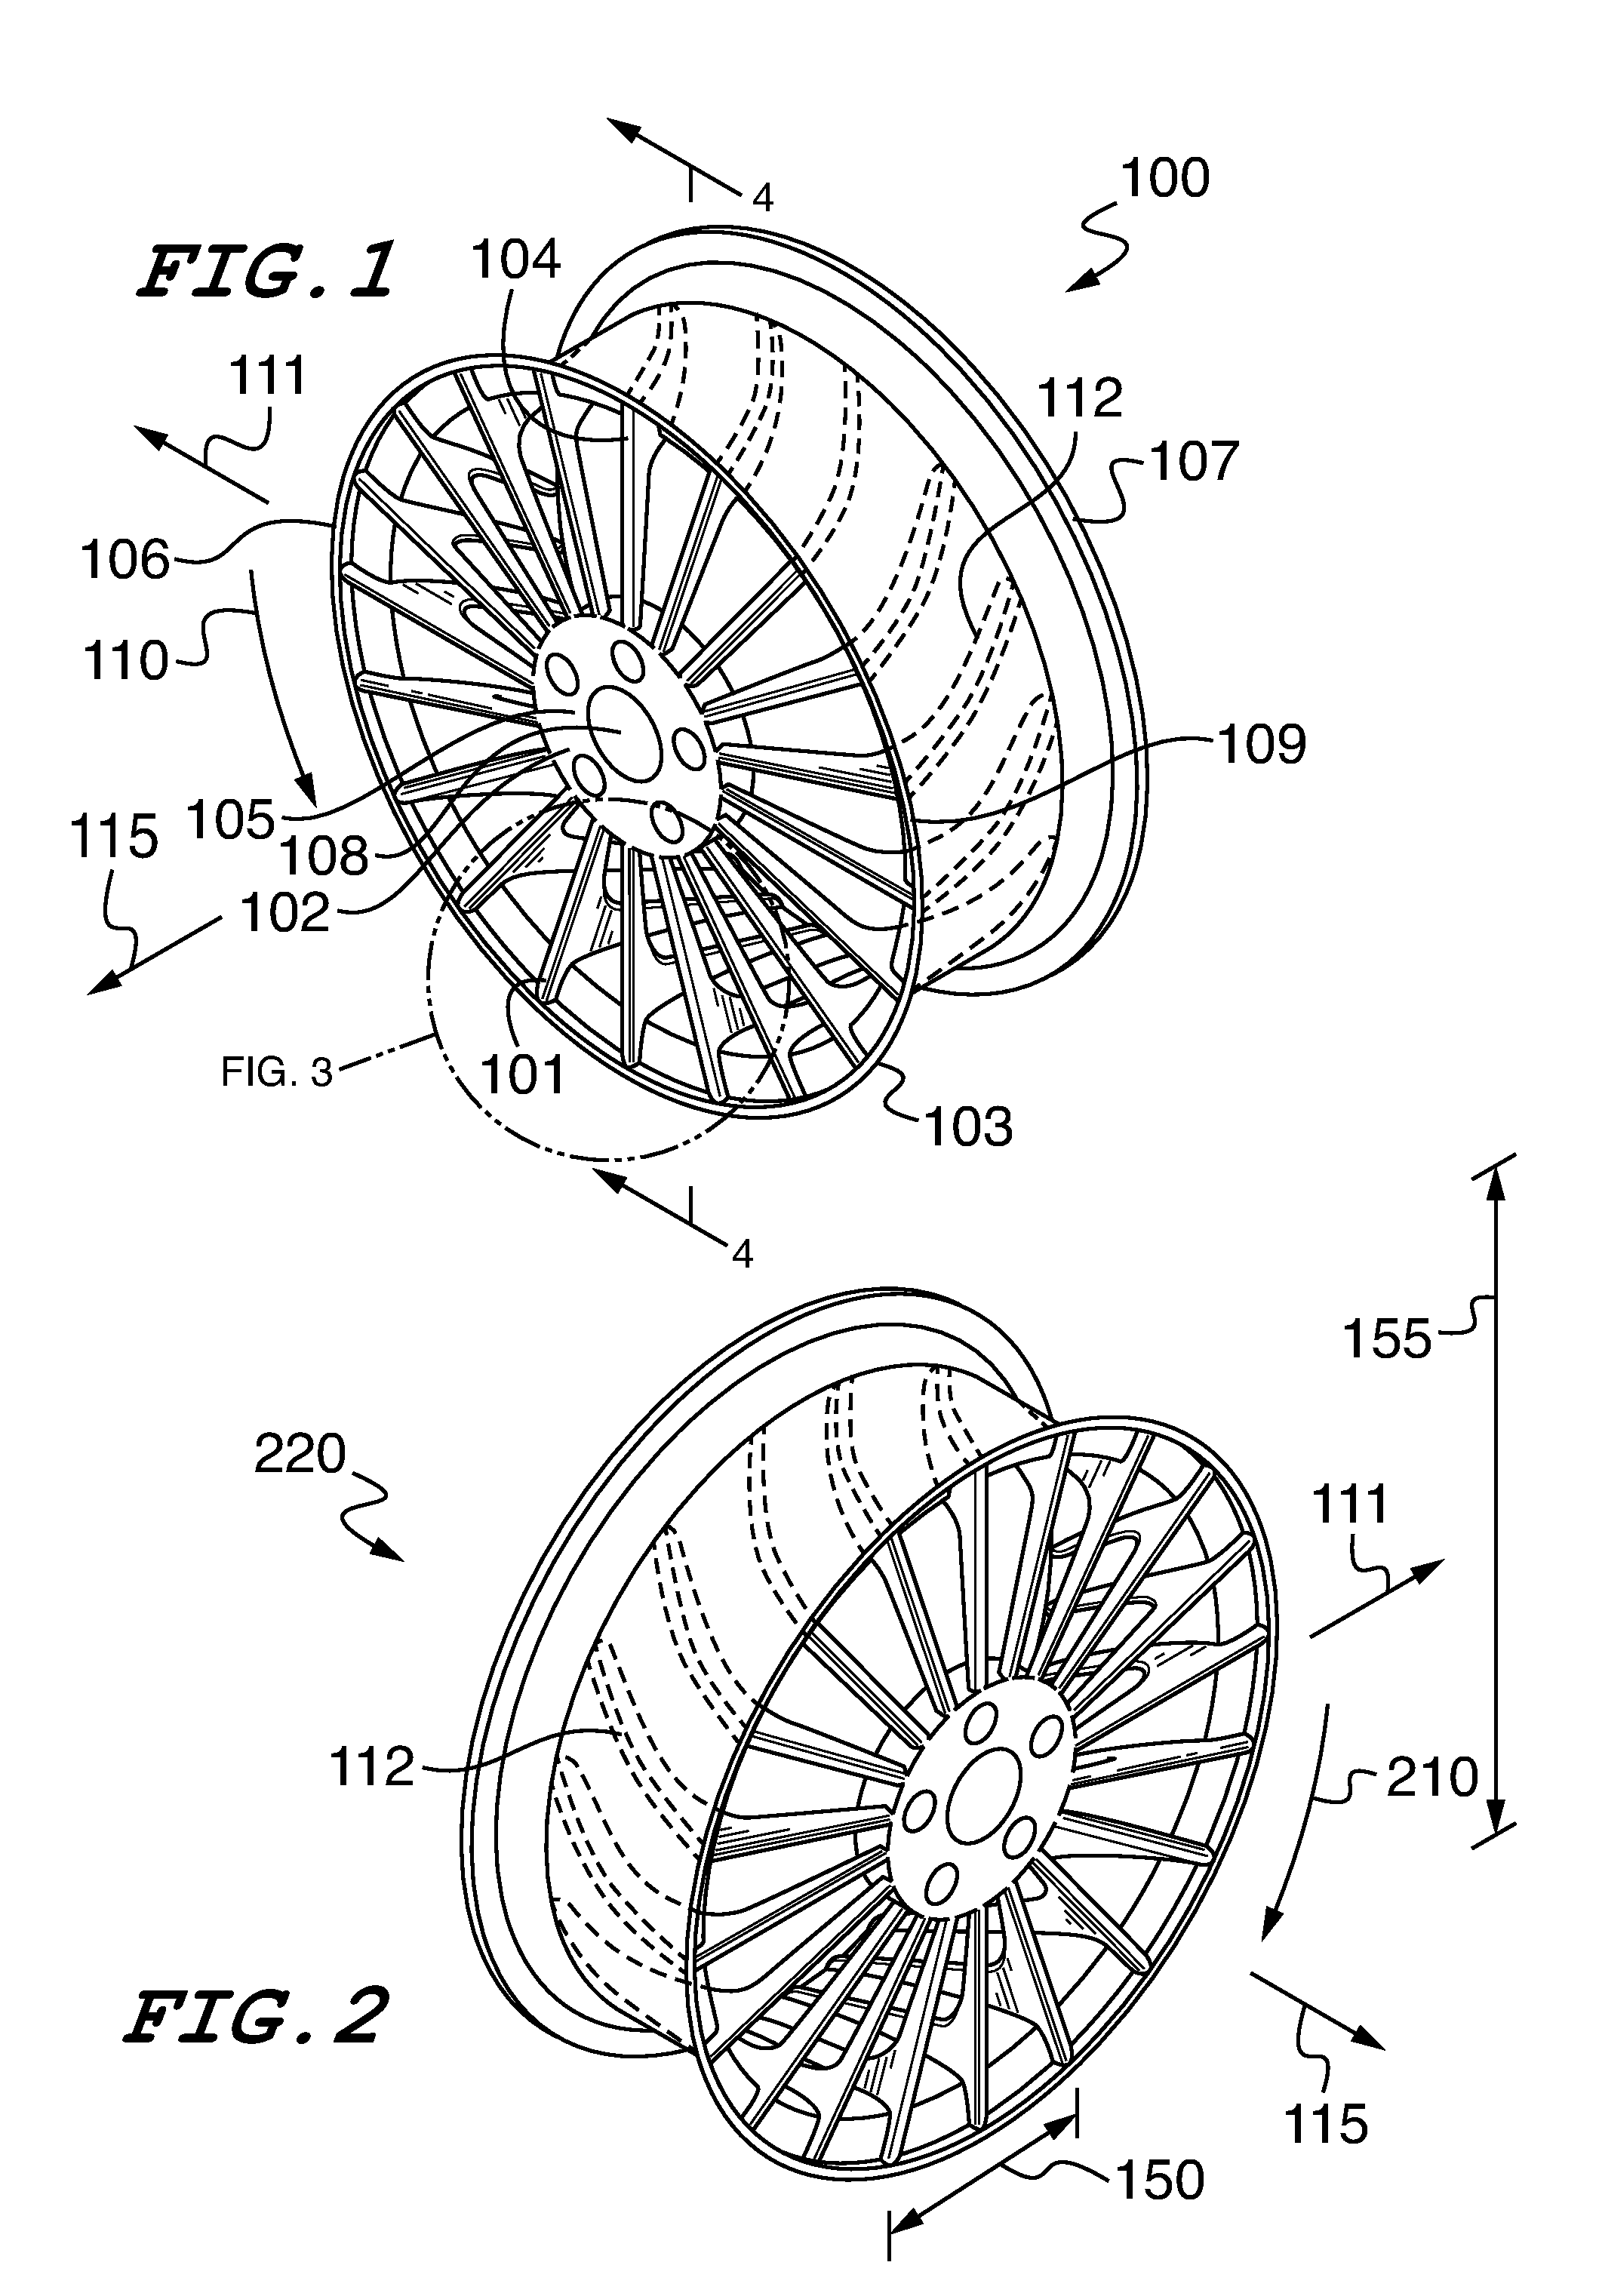 Rim, airless tire and hubcap designs configured to directionally convey air and methods for their use